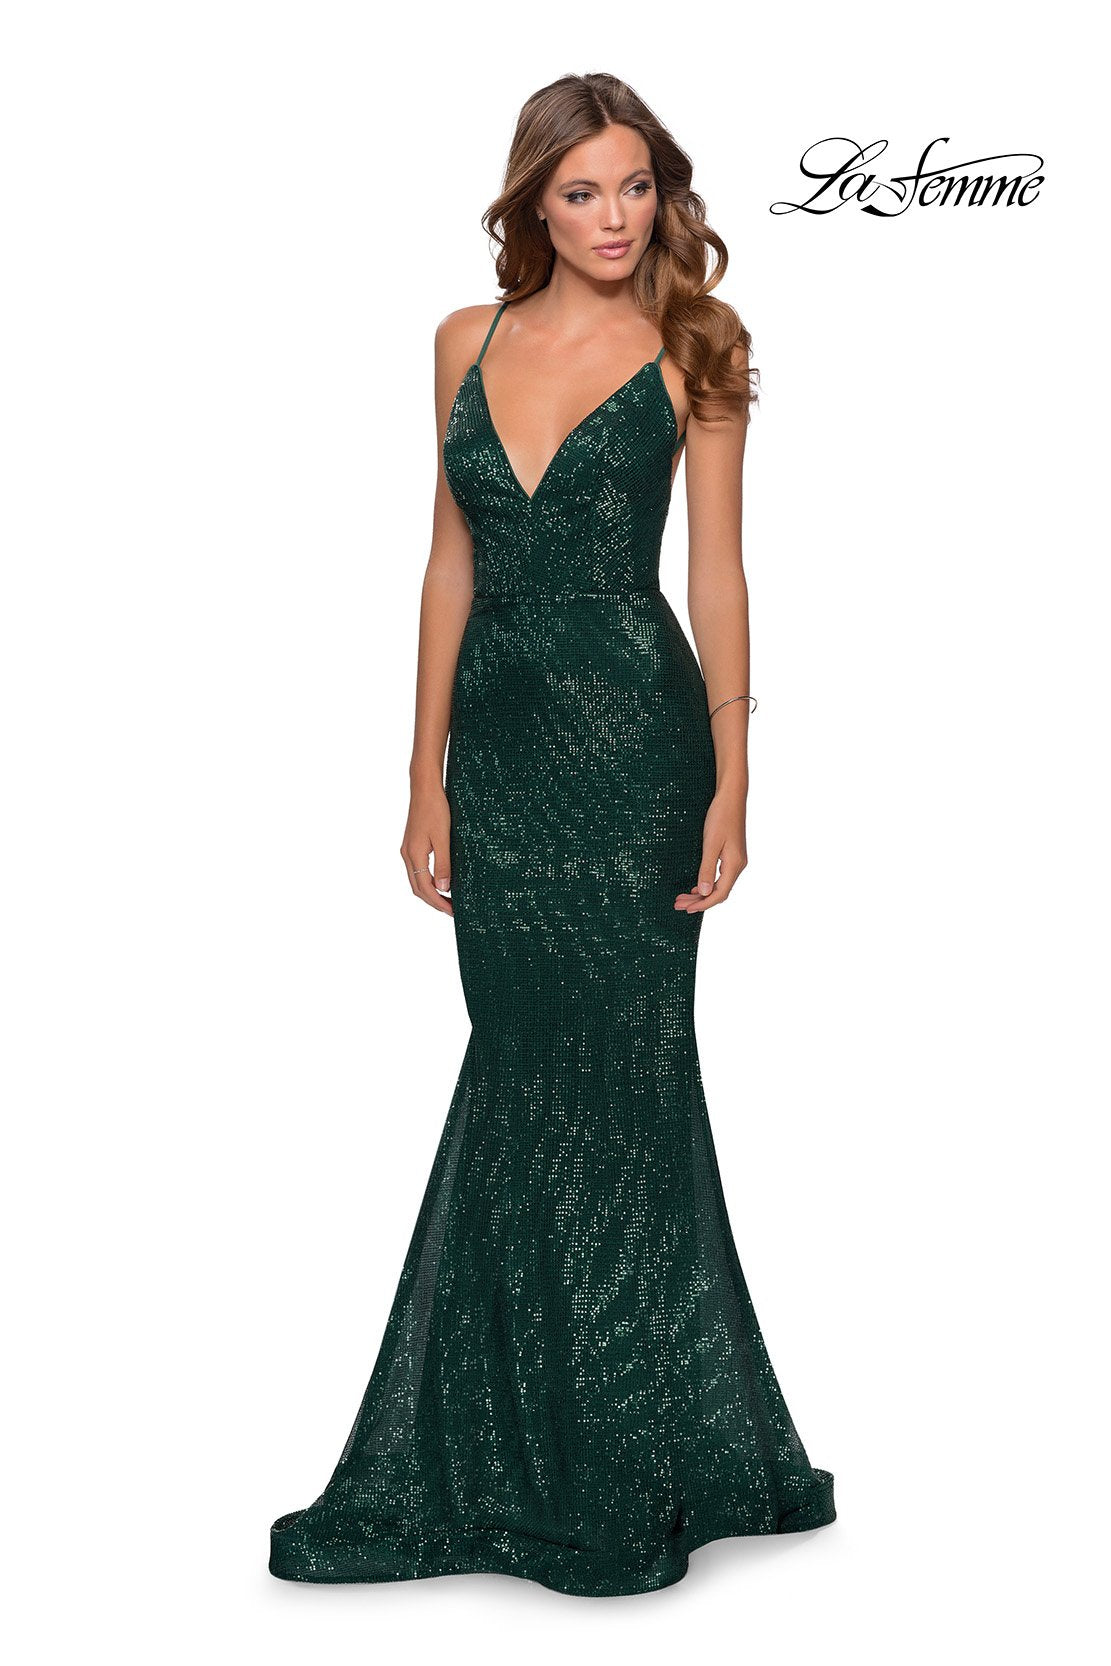 La Femme 28519 dress images in these colors: Burgundy, Champagne, Emerald, Navy.